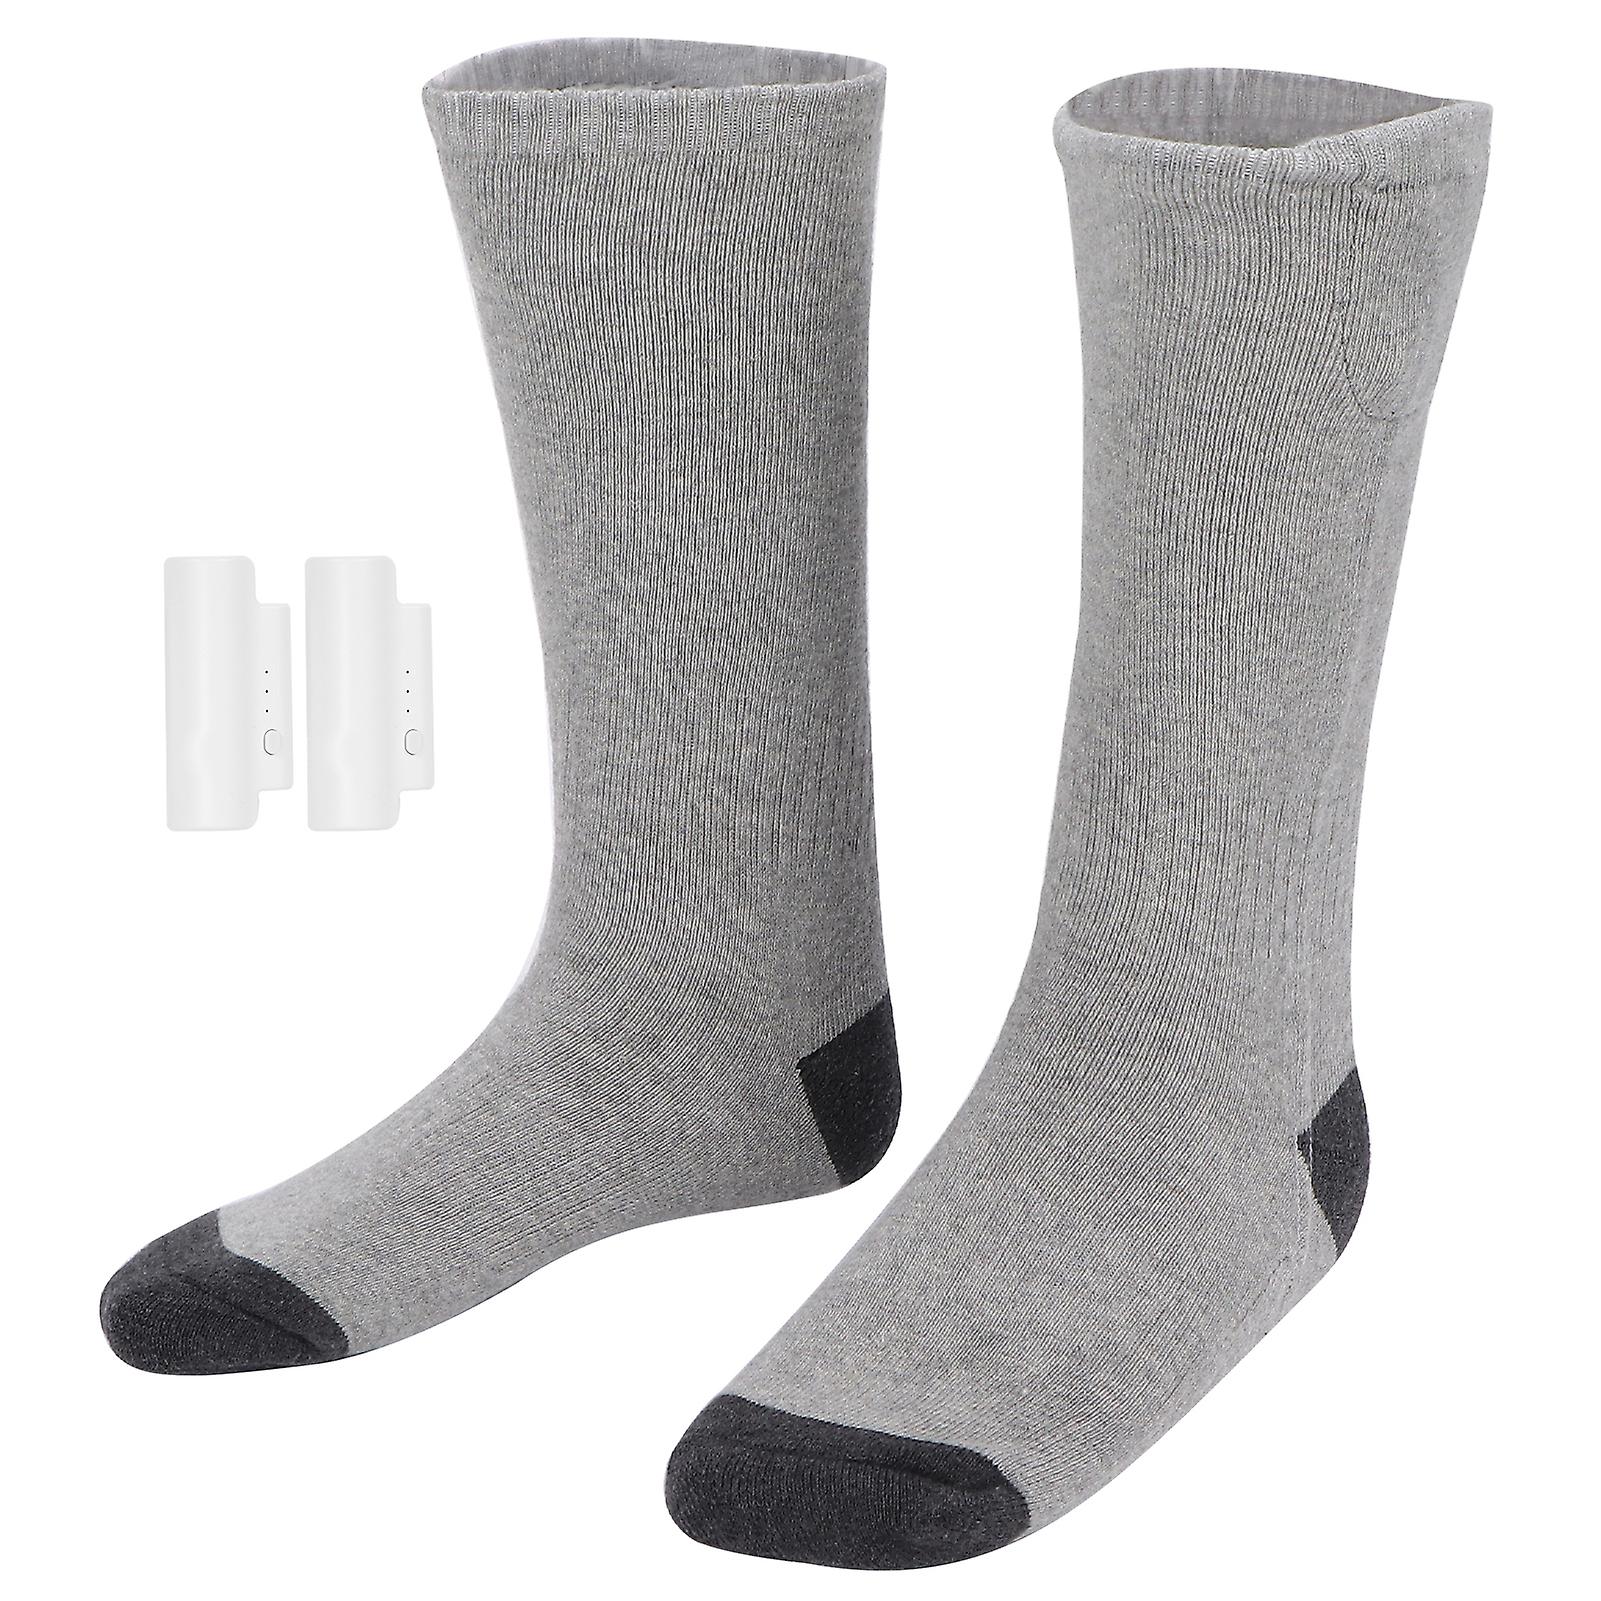 Winter Outdoor Sports Skiing Heated Socks Electric Smart Heating Cotton Stockingsgray